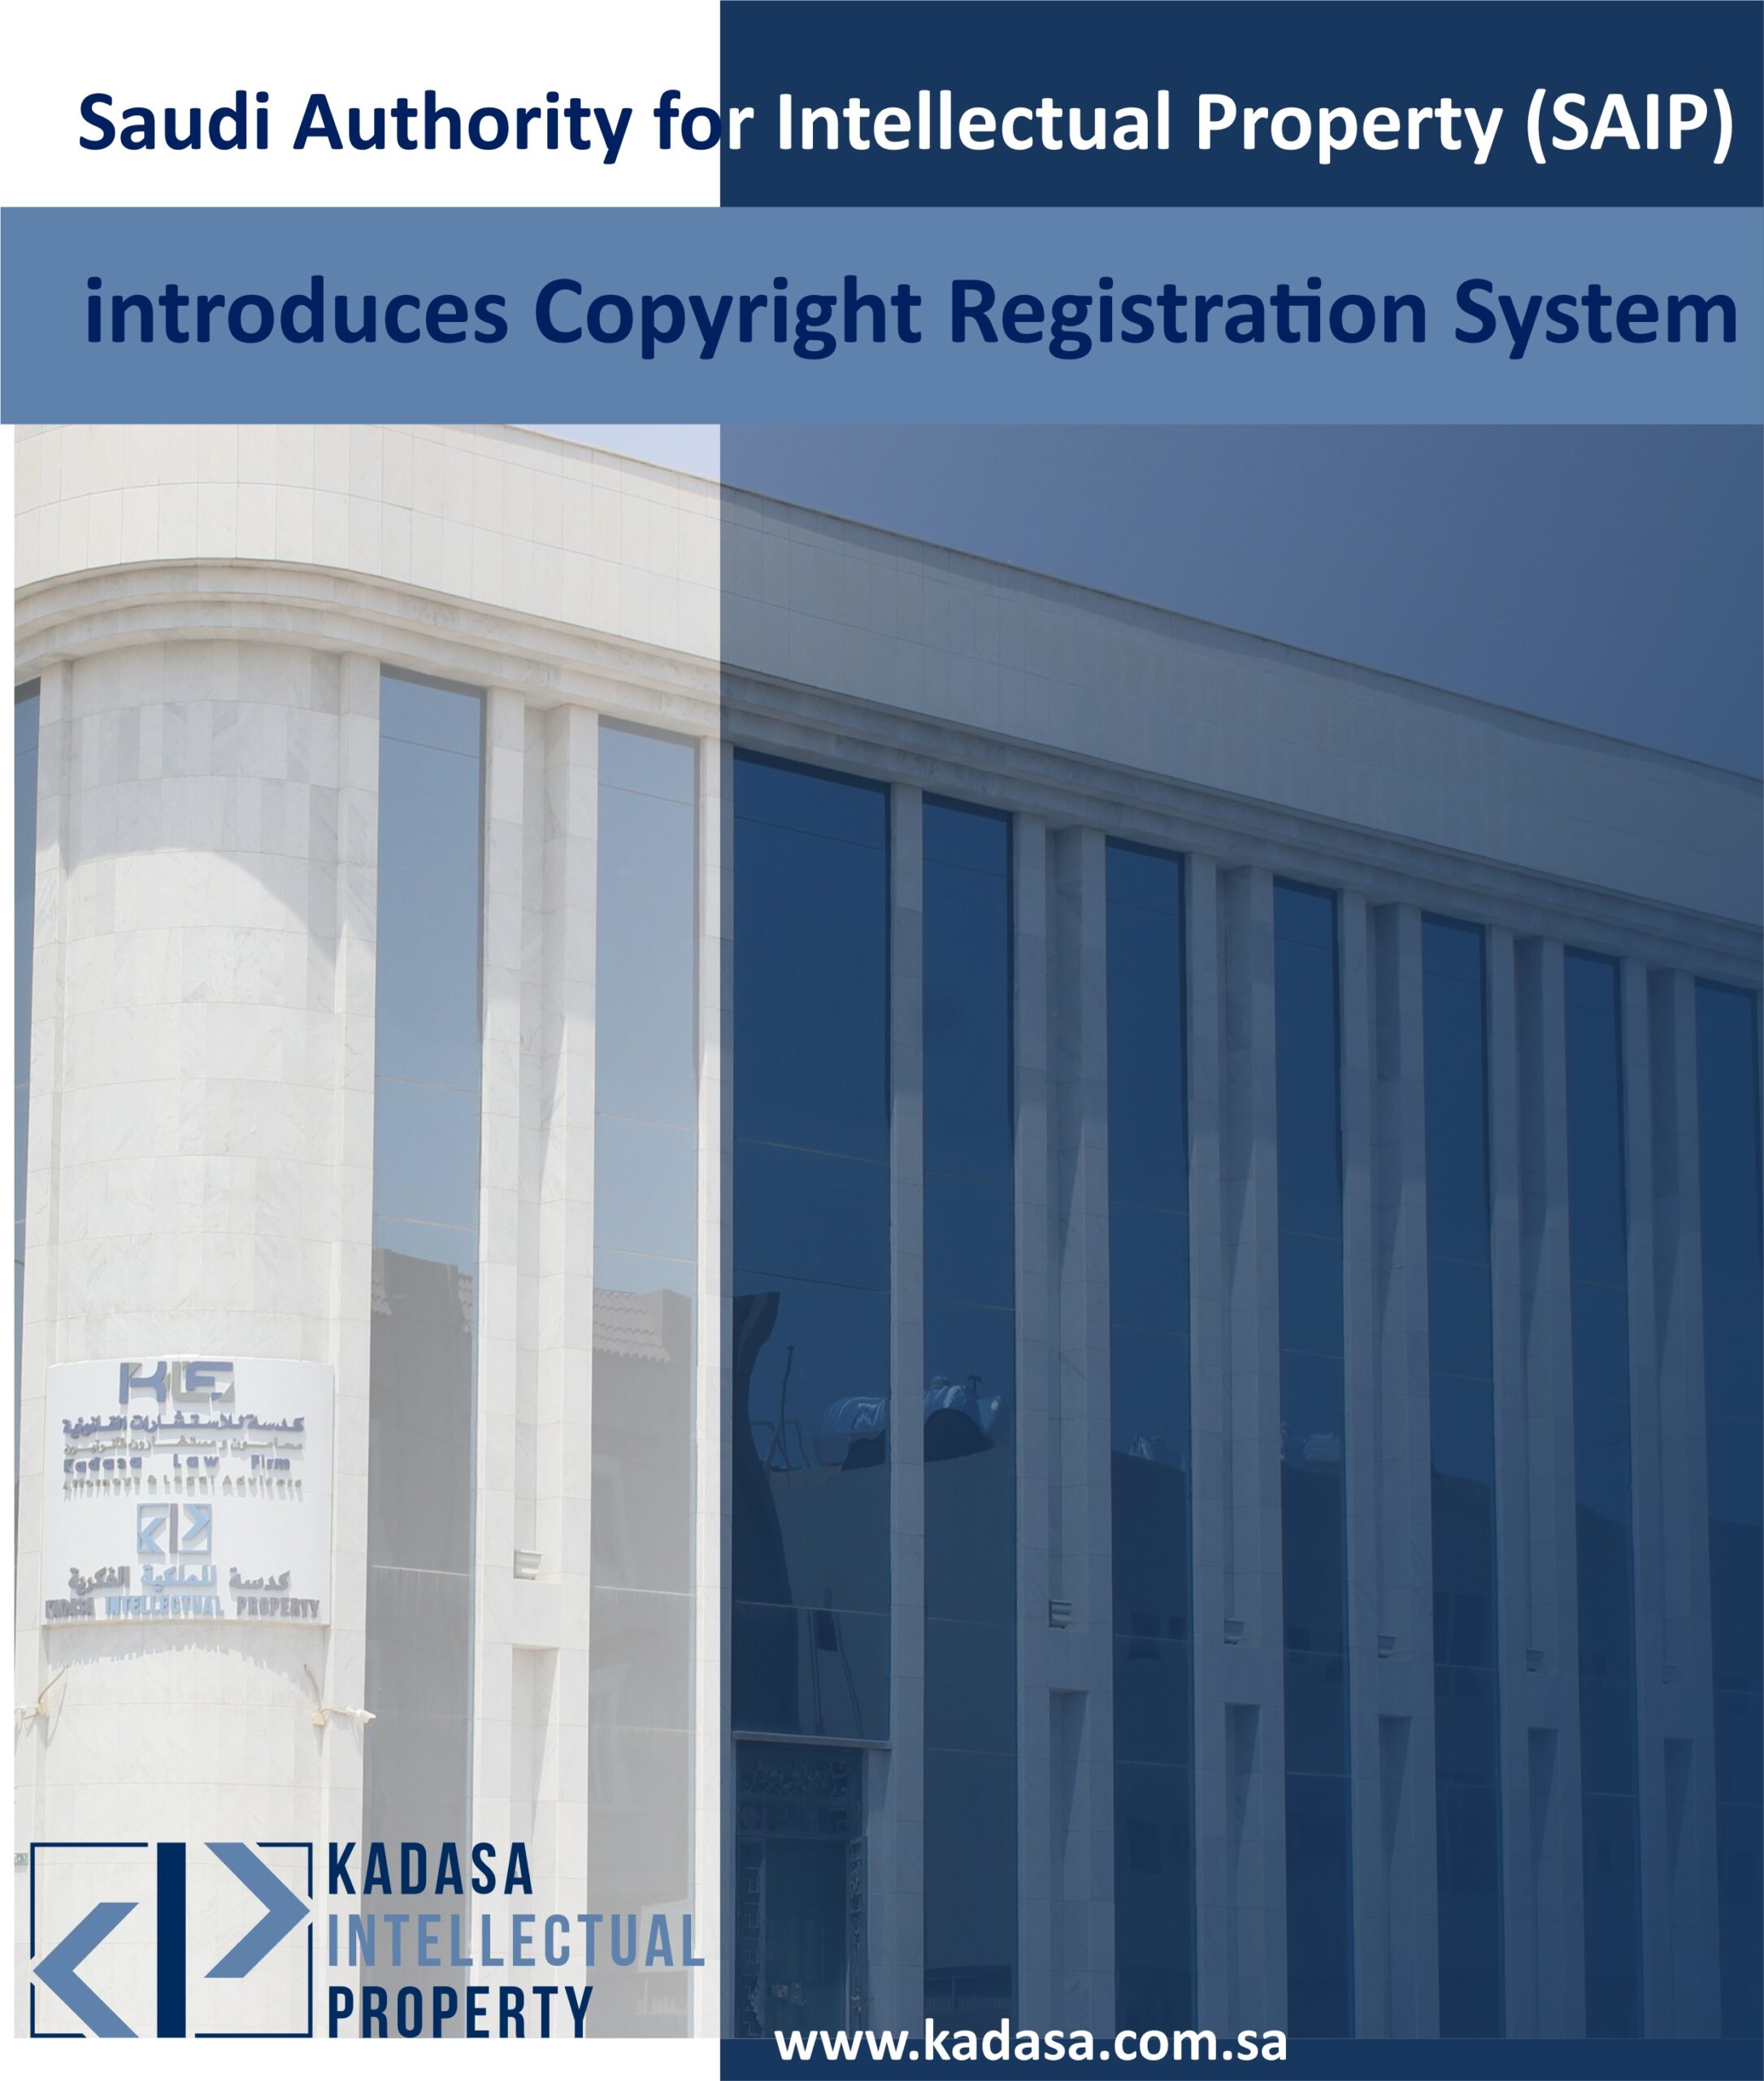 Saudi Authority for Intellectual Property (SAIP) introduces Copyright Registration System